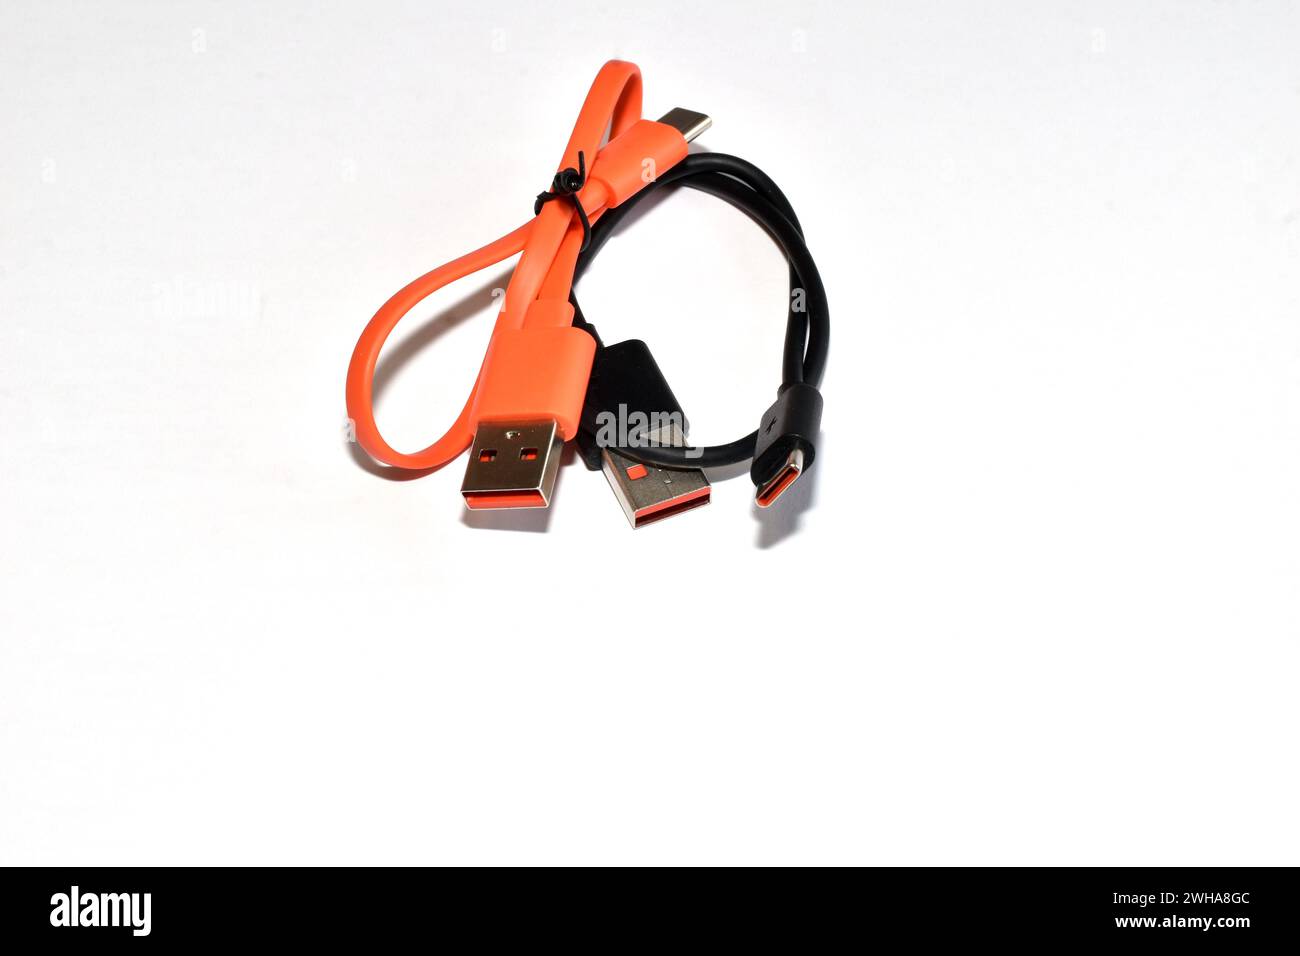 Orange and black USB cables twisted into rings lie on a white background. Stock Photo